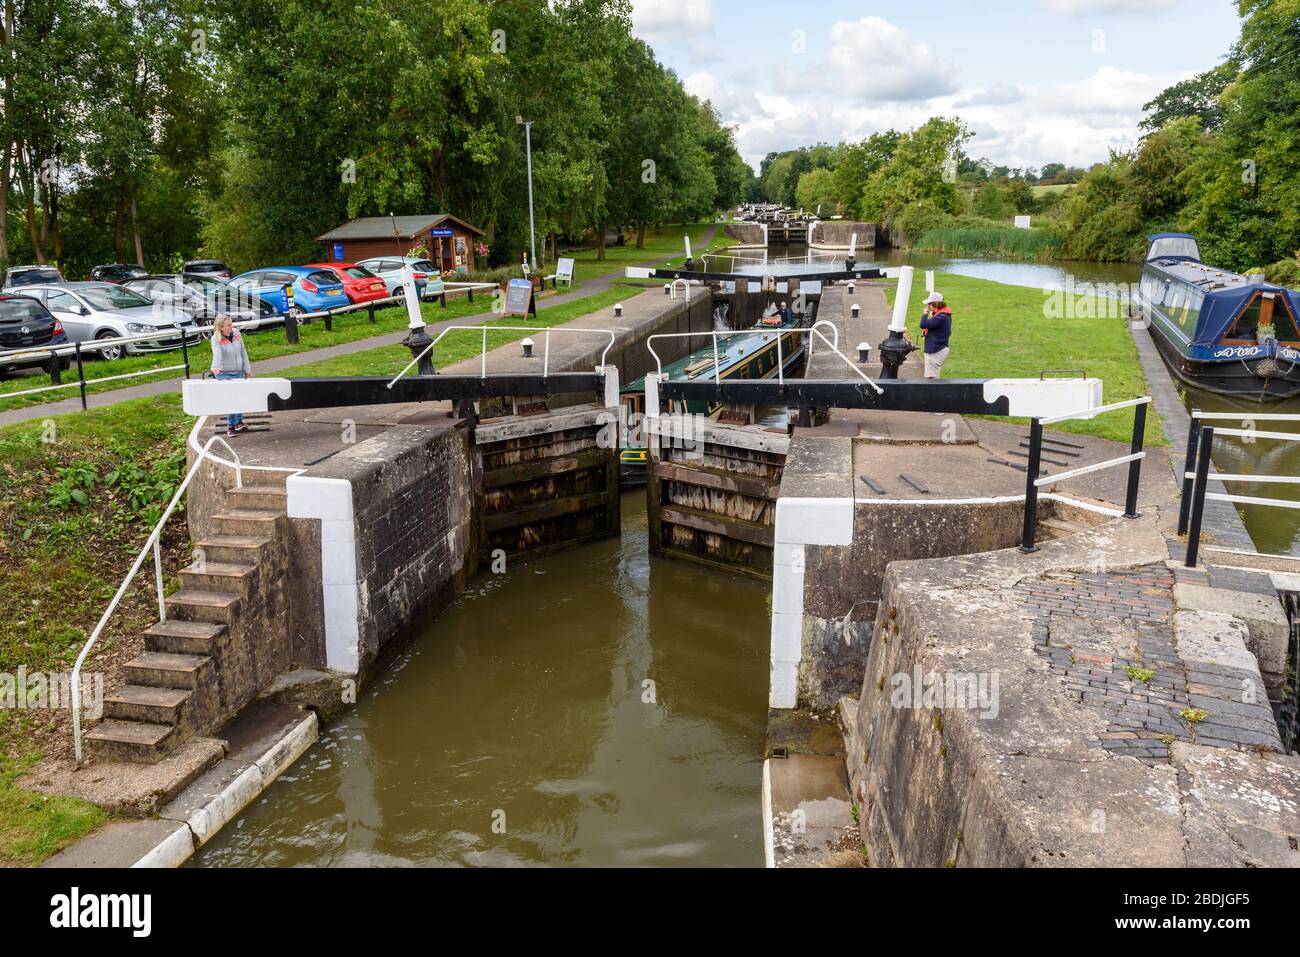 Narrowboats à Hatton Locks sur le grand canal syndical, Warwickshire, Angleterre Banque D'Images